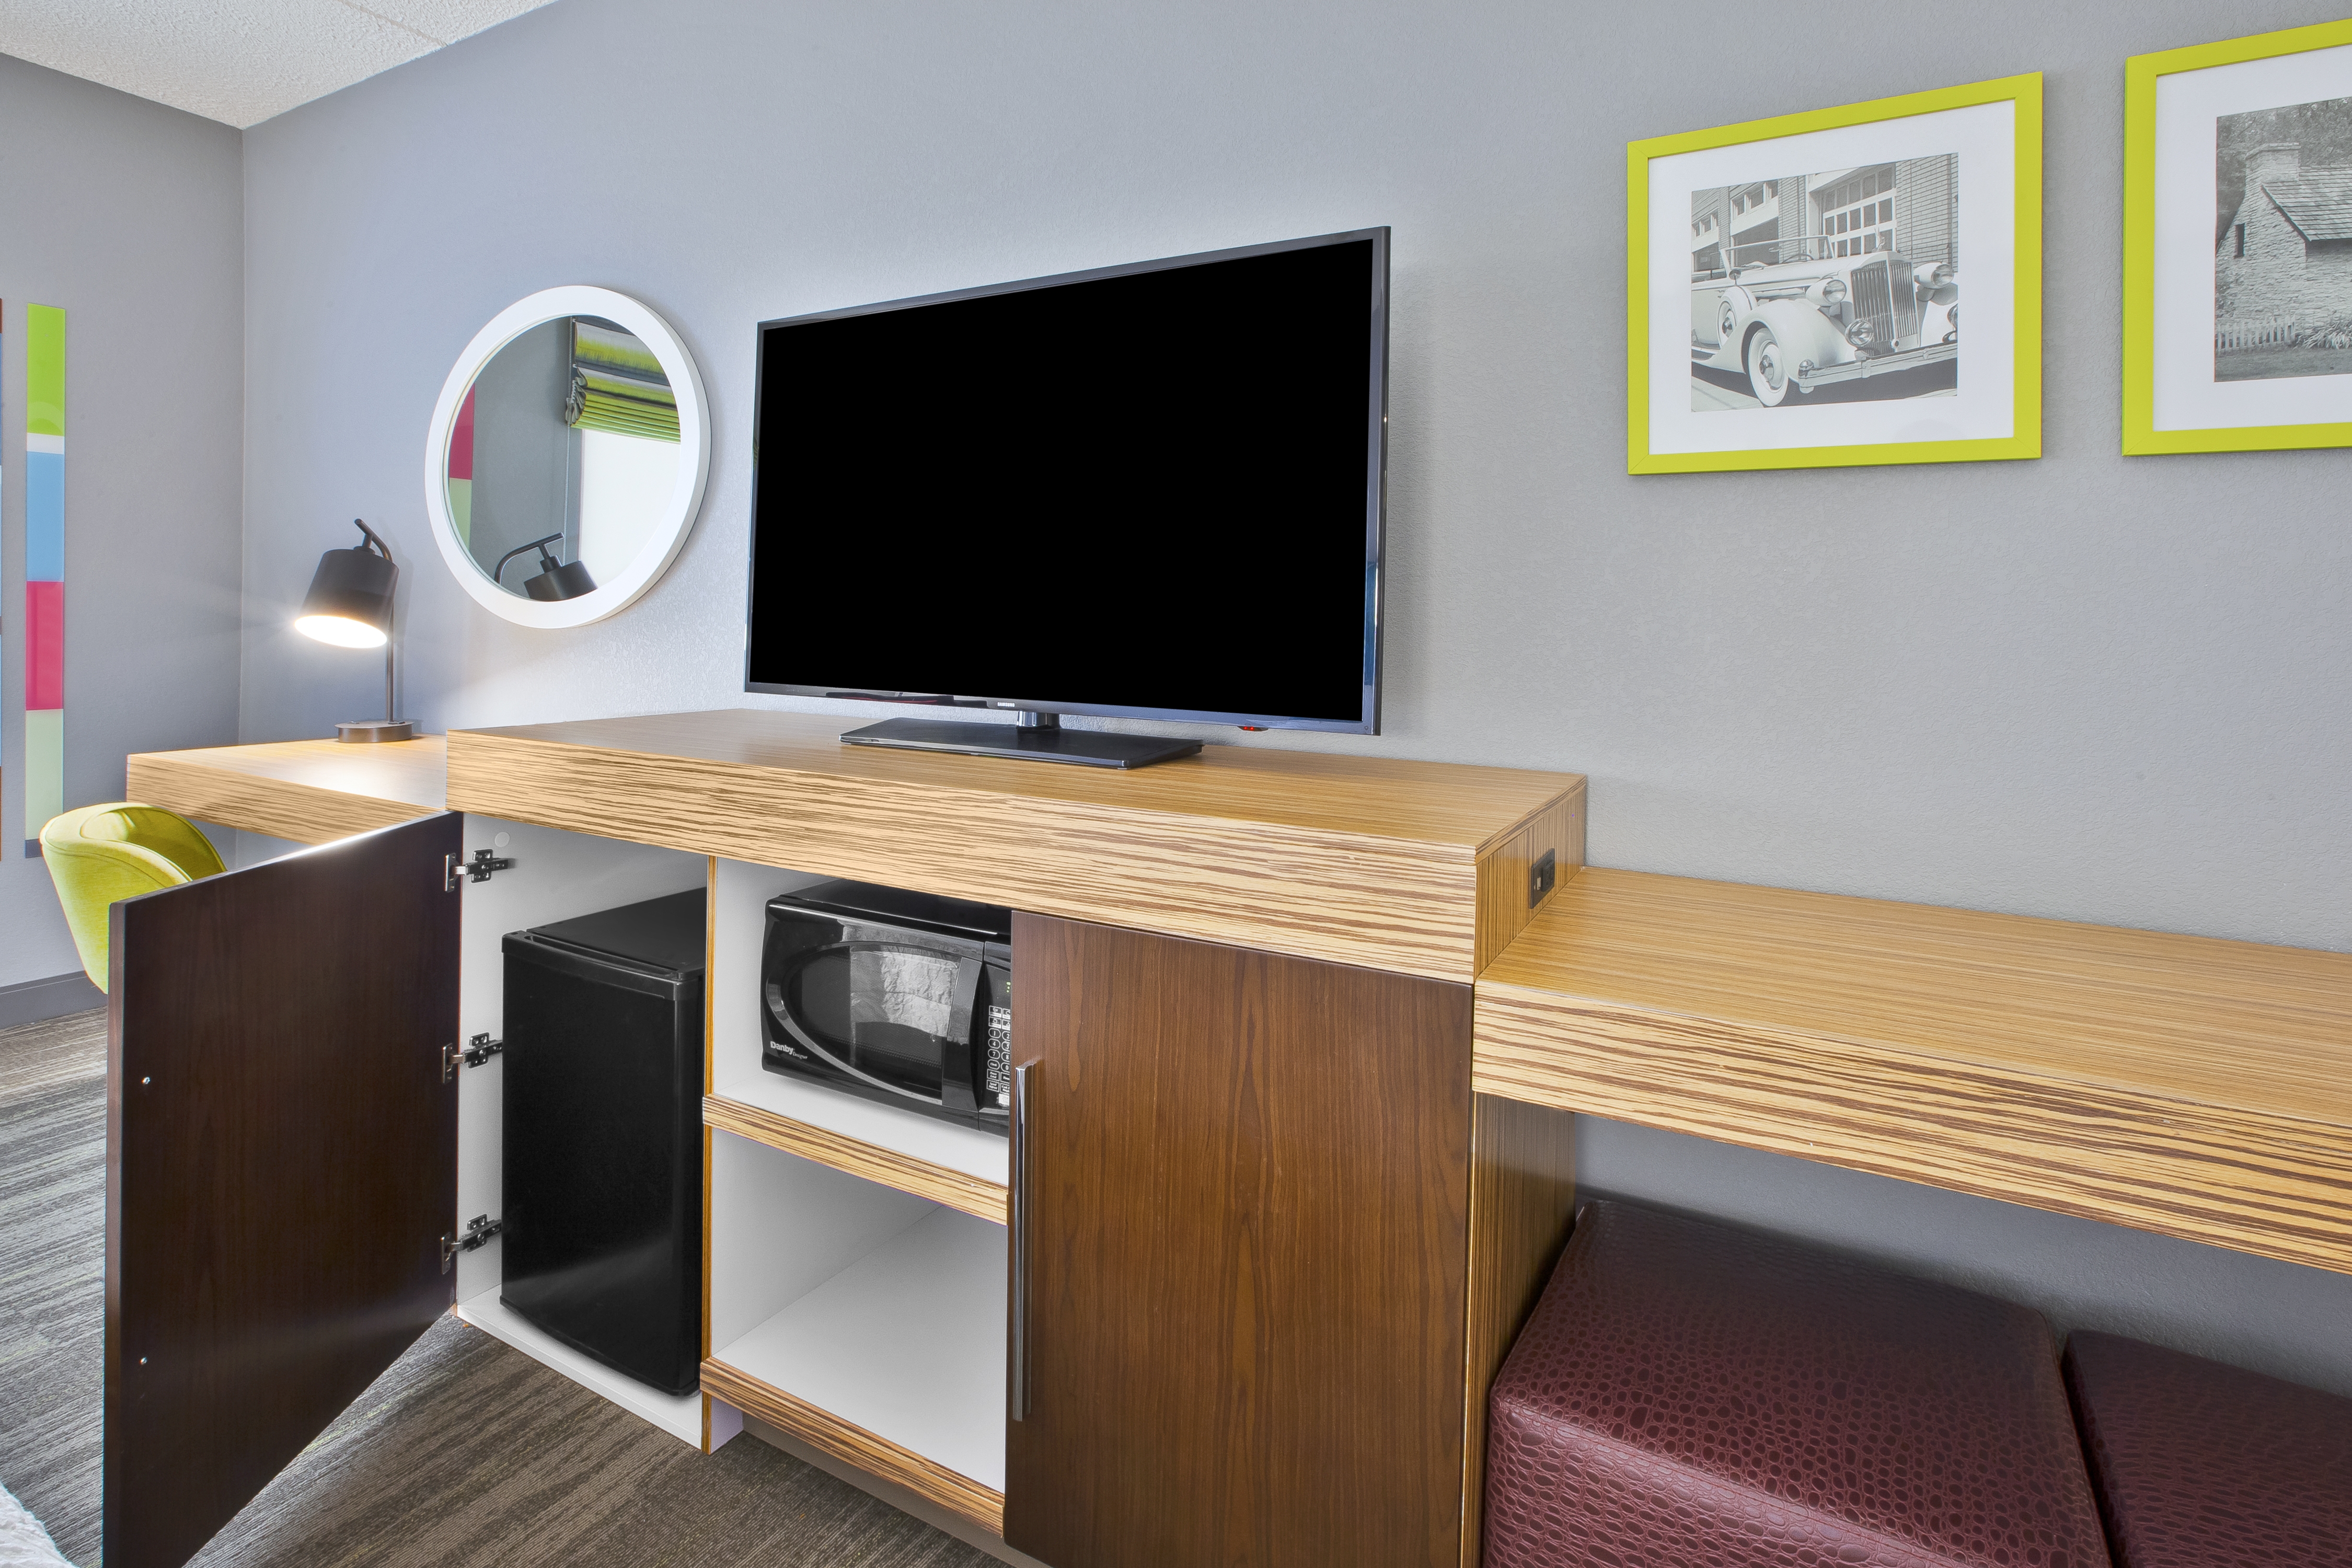 Studio Suite With Mini-Refrigerator, Microwave, Flat Screen TV, Chair, and Desk With Illuminated Lamp